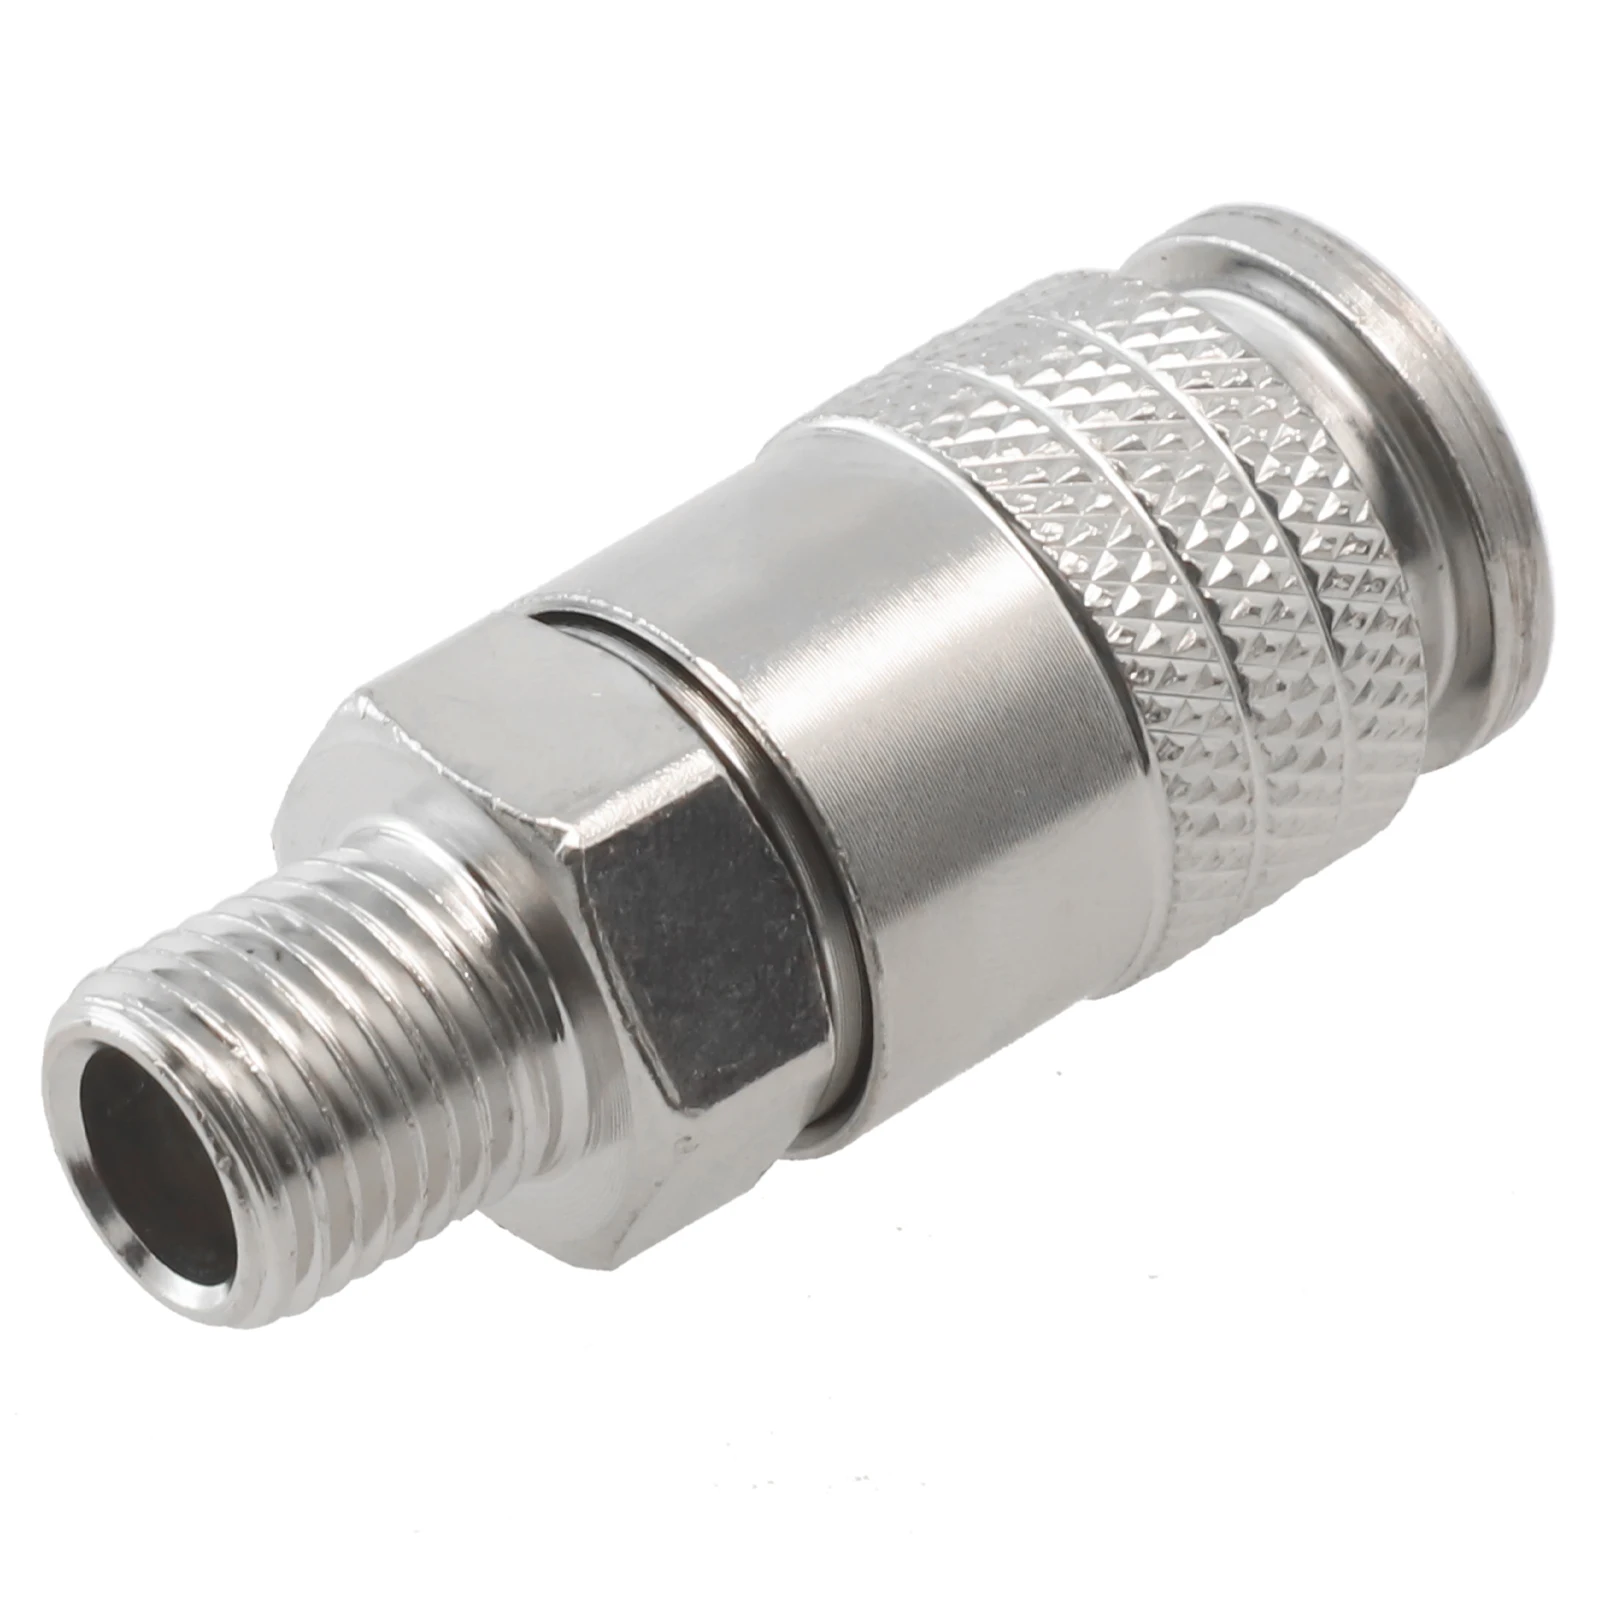 Pneumatic Fitting G1/4 Male Thread EU Standard Quick Connector For Air Compressor 53mm Length Air Compressor Tool Parts 1 4 european style air quick connector 2 lines separated pneumatic tool aluminum material air compressor part air hose coupler